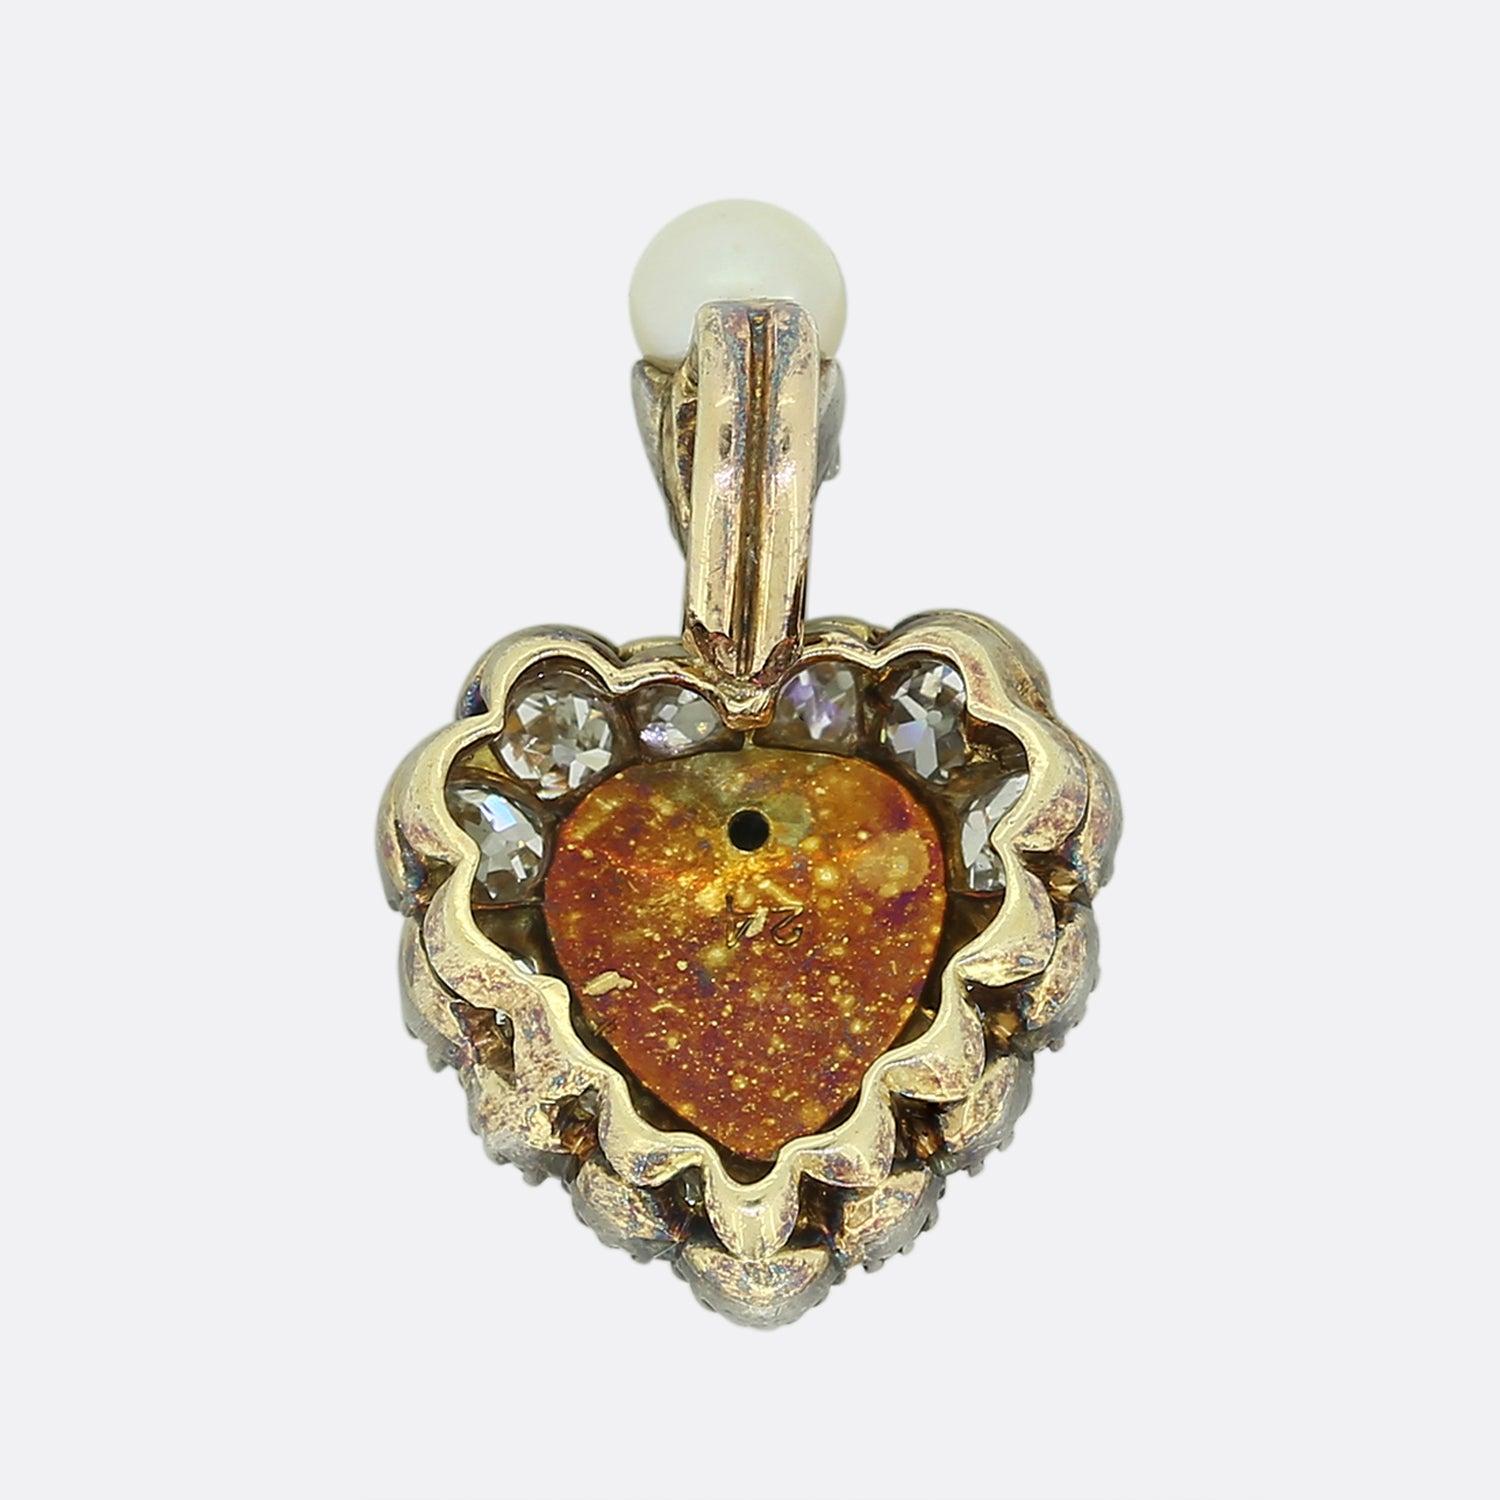 Here we have an antique pendant from the Victorian era. This charming piece has been crafted into the shape of a love heart and boasts a sizeable pear shaped natural silver pearl at the centre. This focal stone is accentuated by a frame of old cut